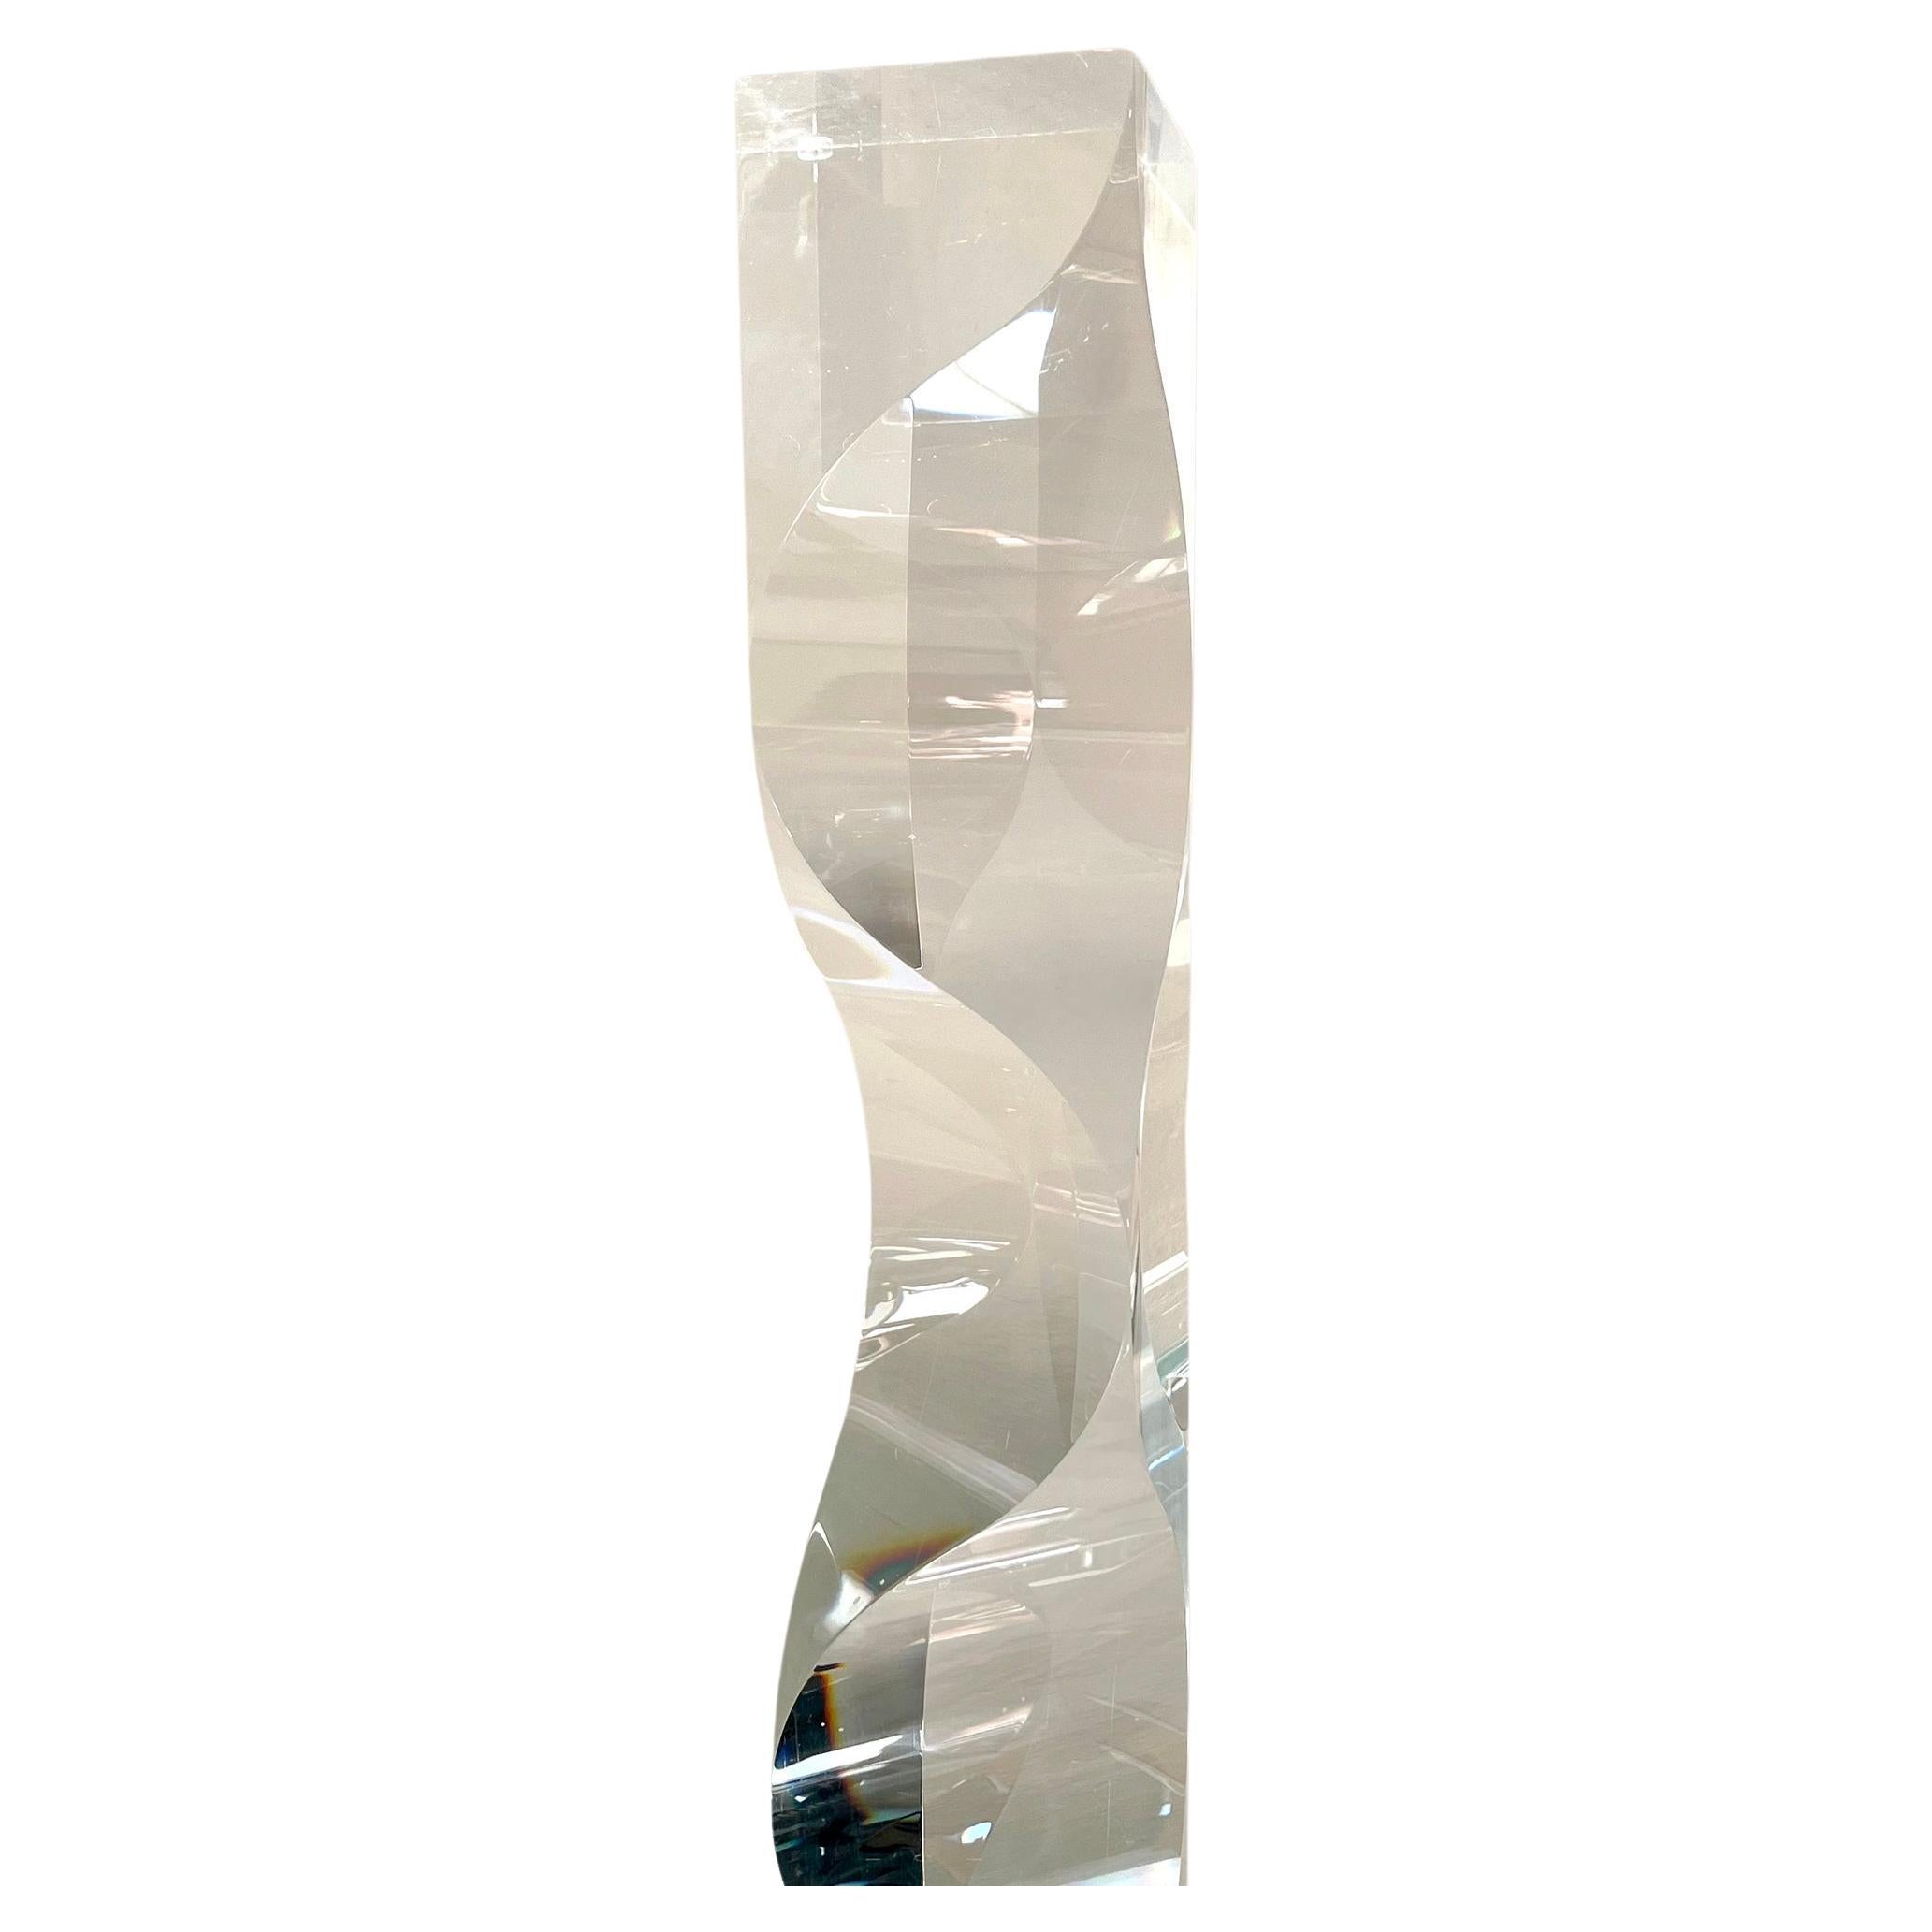 Italian Alessio Tasca for Fusina Acrylic Lucite Prism Tower Sculpture For Sale